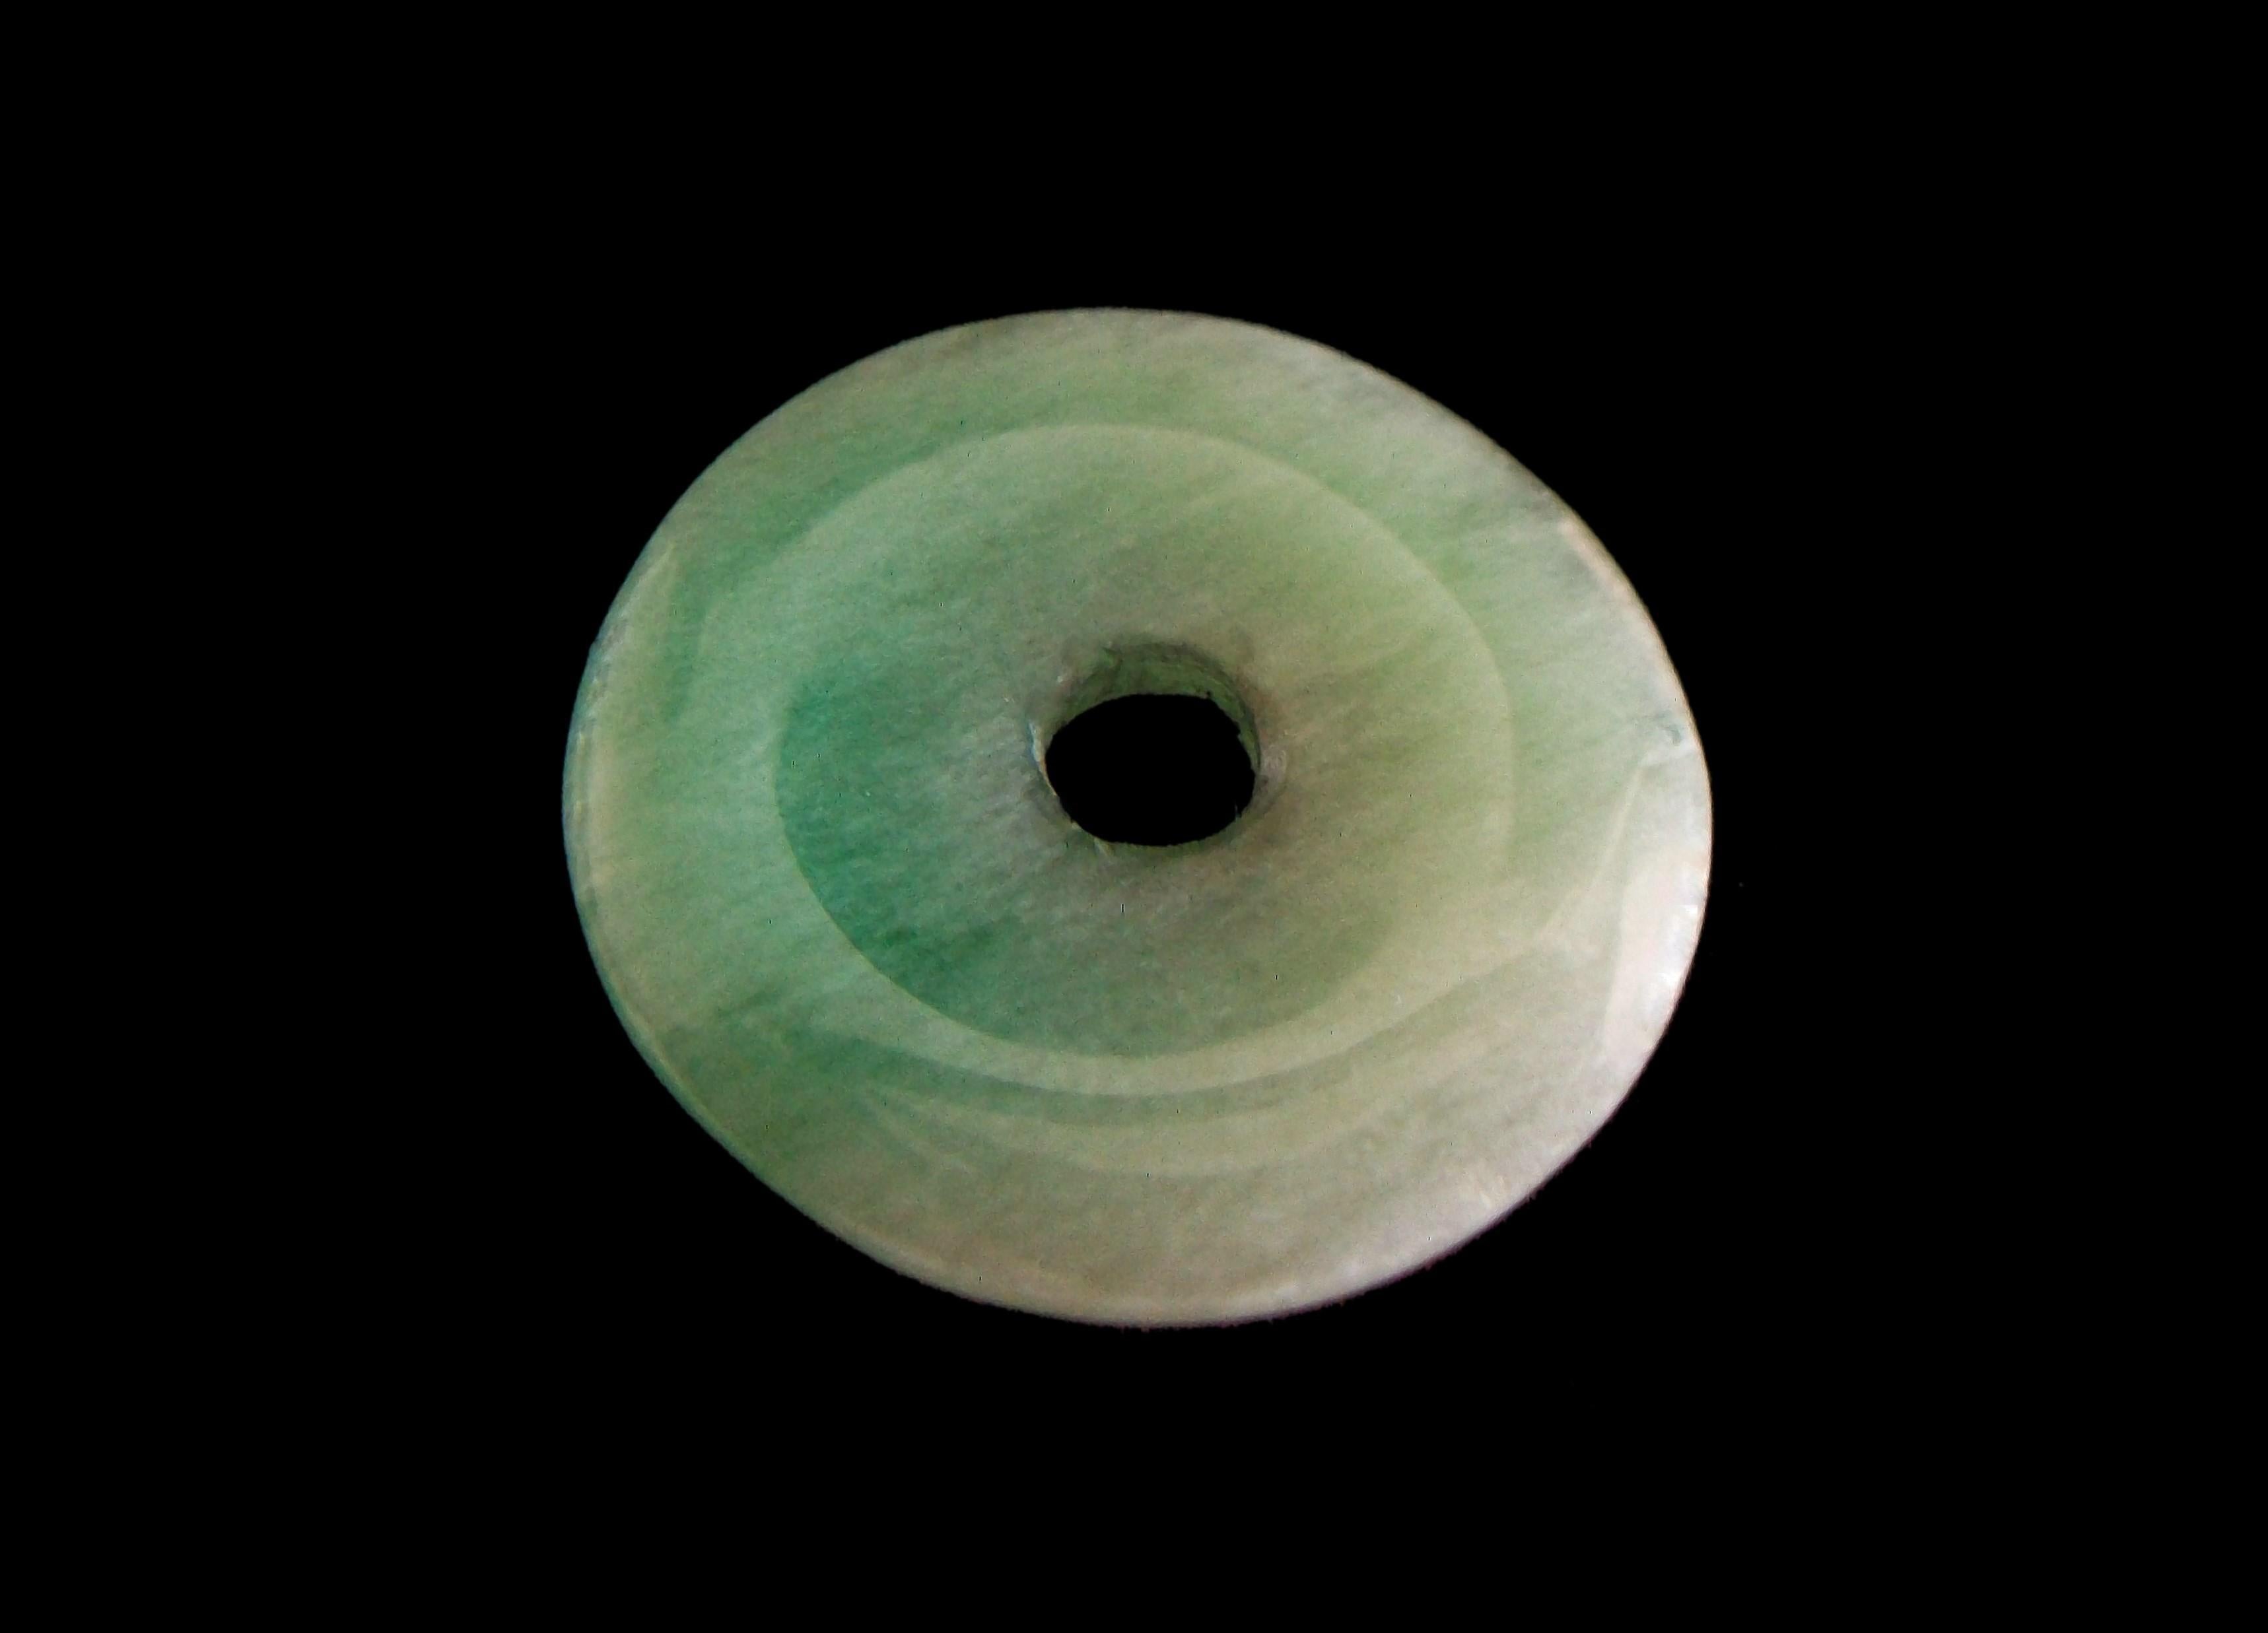 Vintage green nephrite round disk pendant - China - 20th century.

Excellent vintage condition - all original - no loss - no damage - no repairs - minor scratches from previous jewelry mounts - signs of age and use - ready to wear.

Size/Dimensions